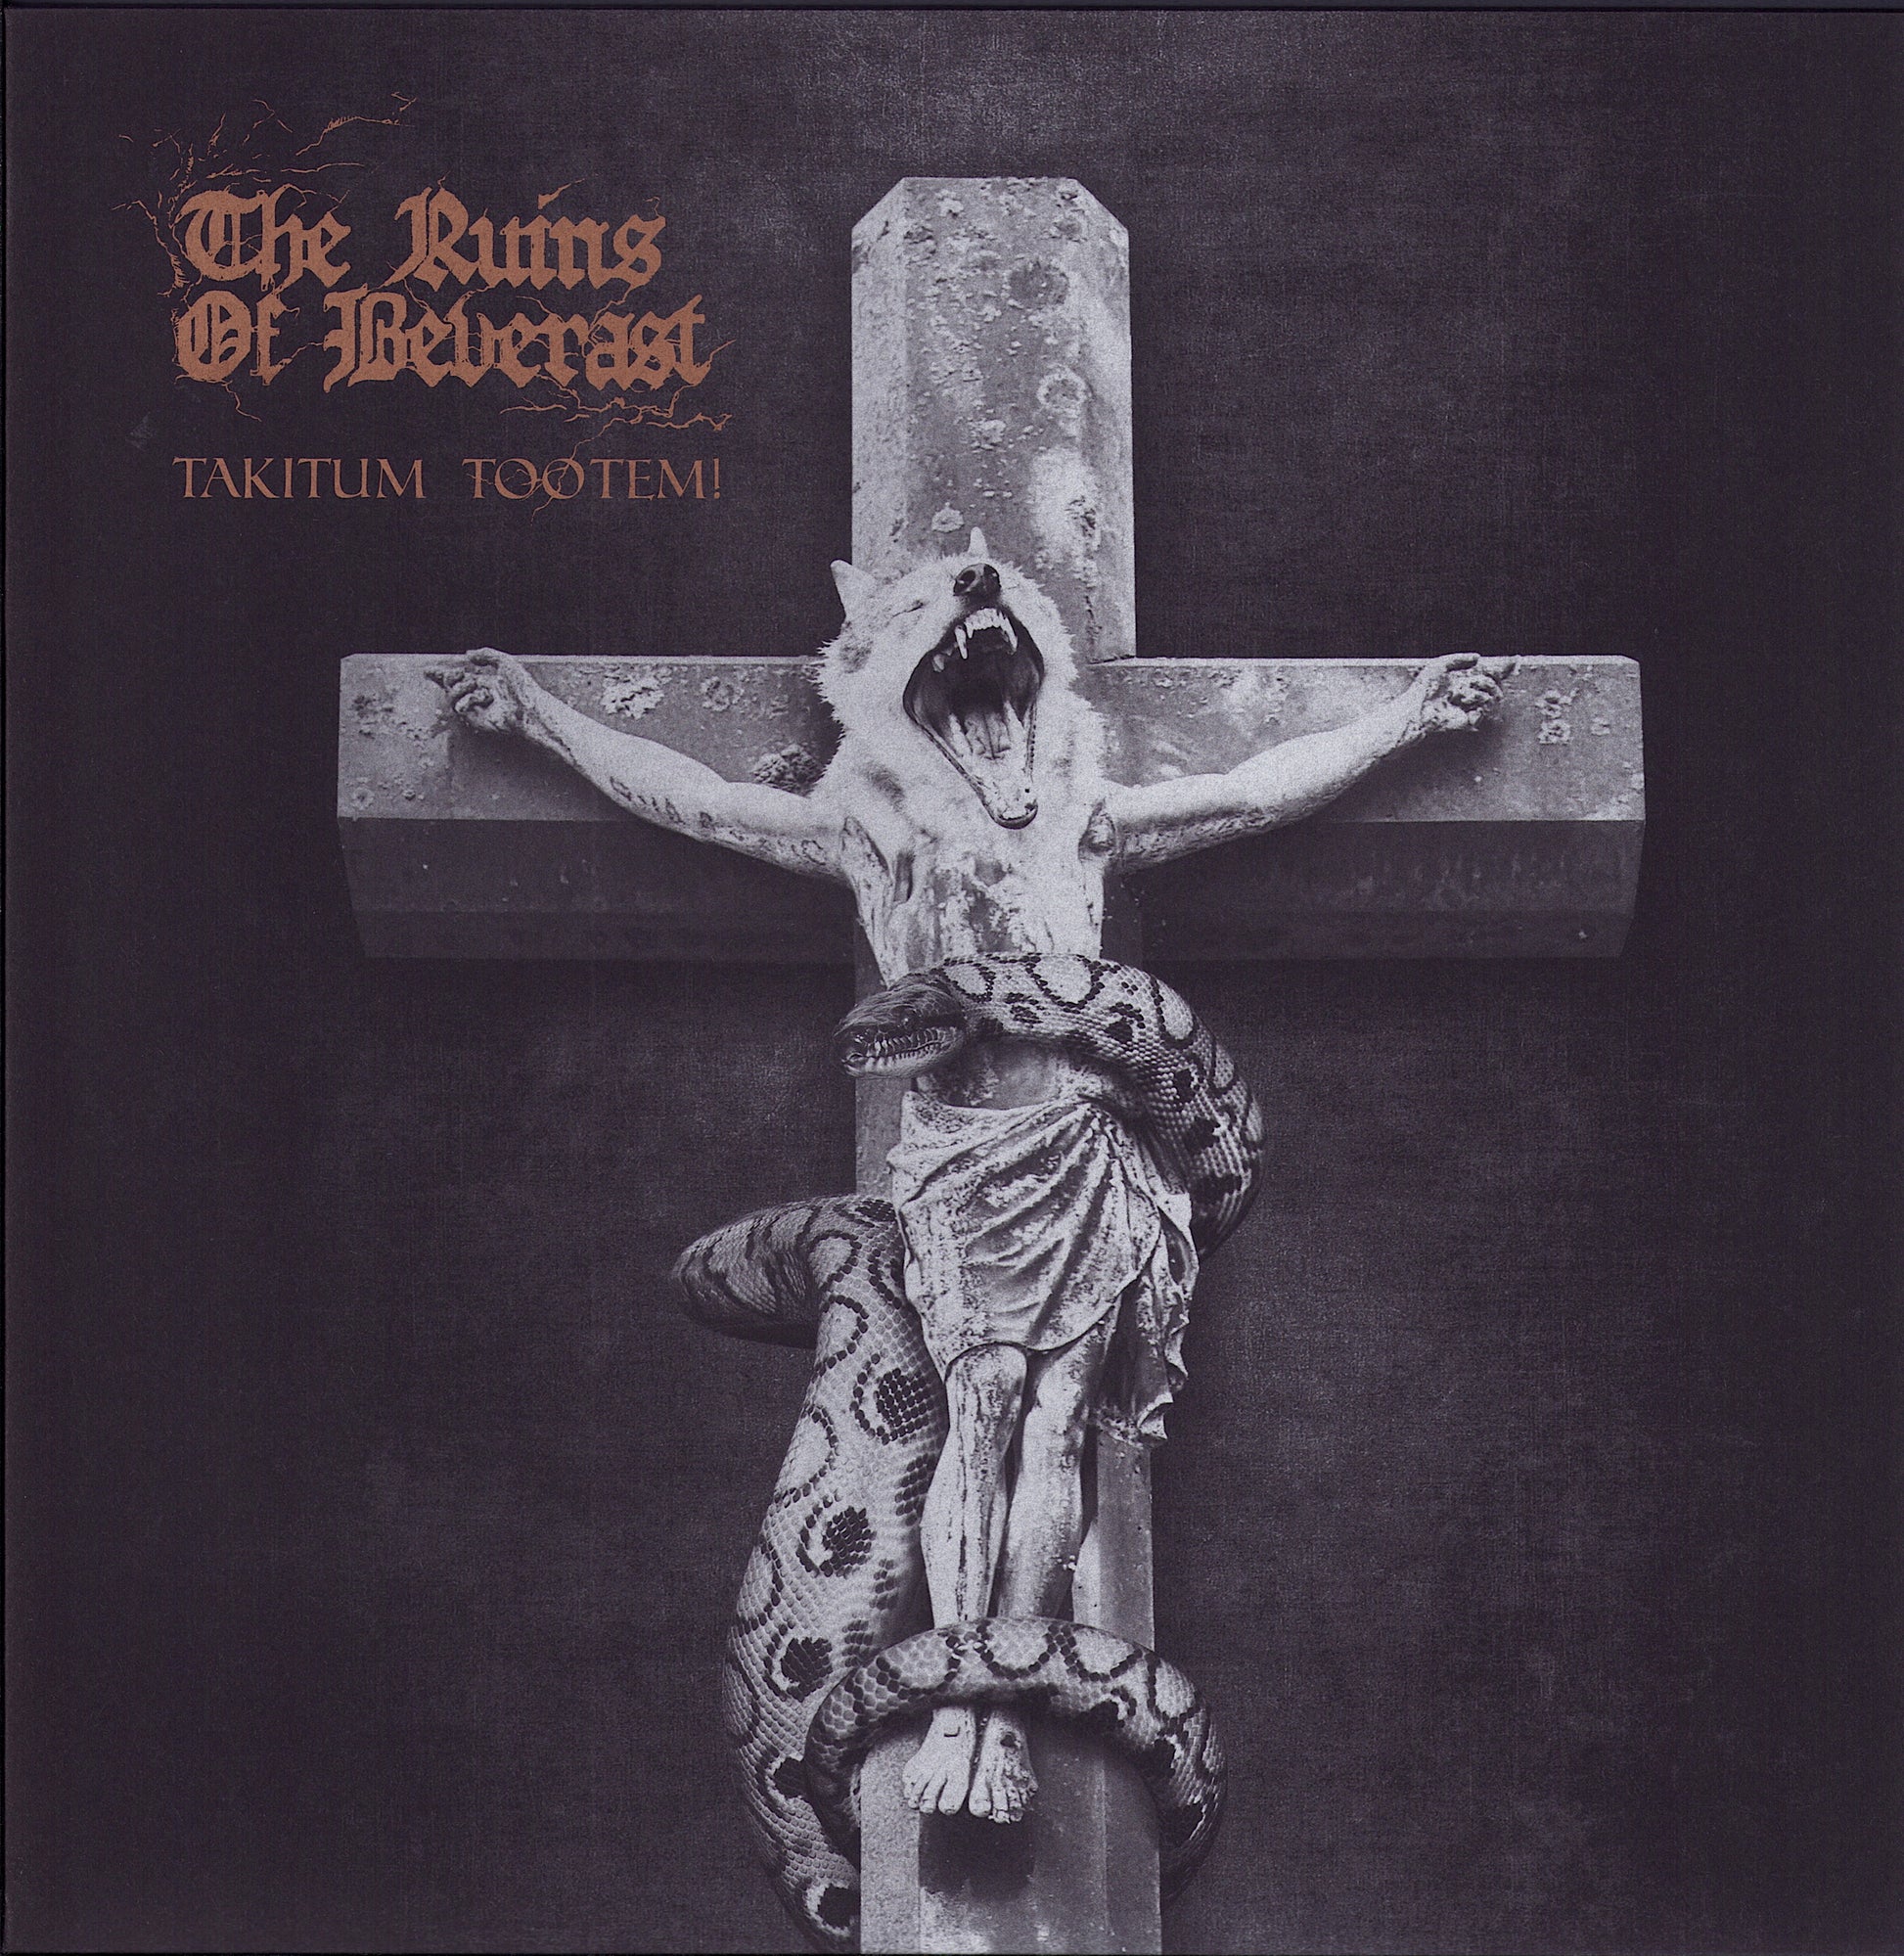 The Ruins Of Beverast – Takitum Tootem! Clear Vinyl 12" EP